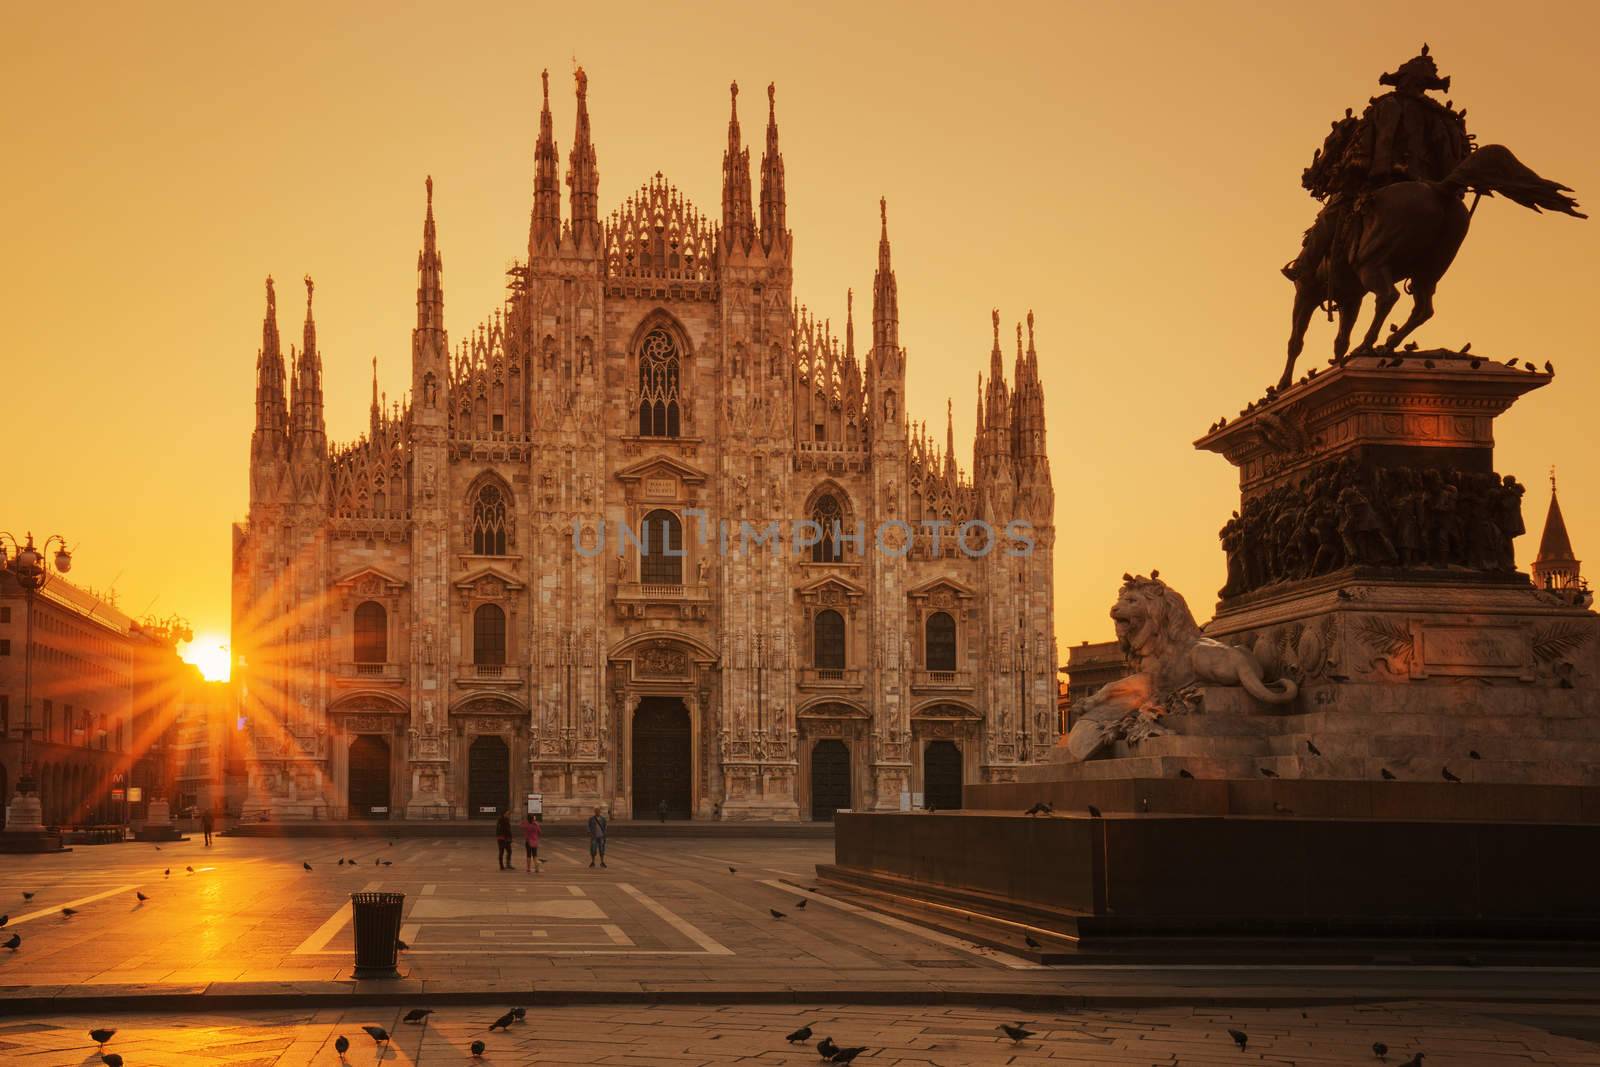 View of Duomo at sunrise by vwalakte